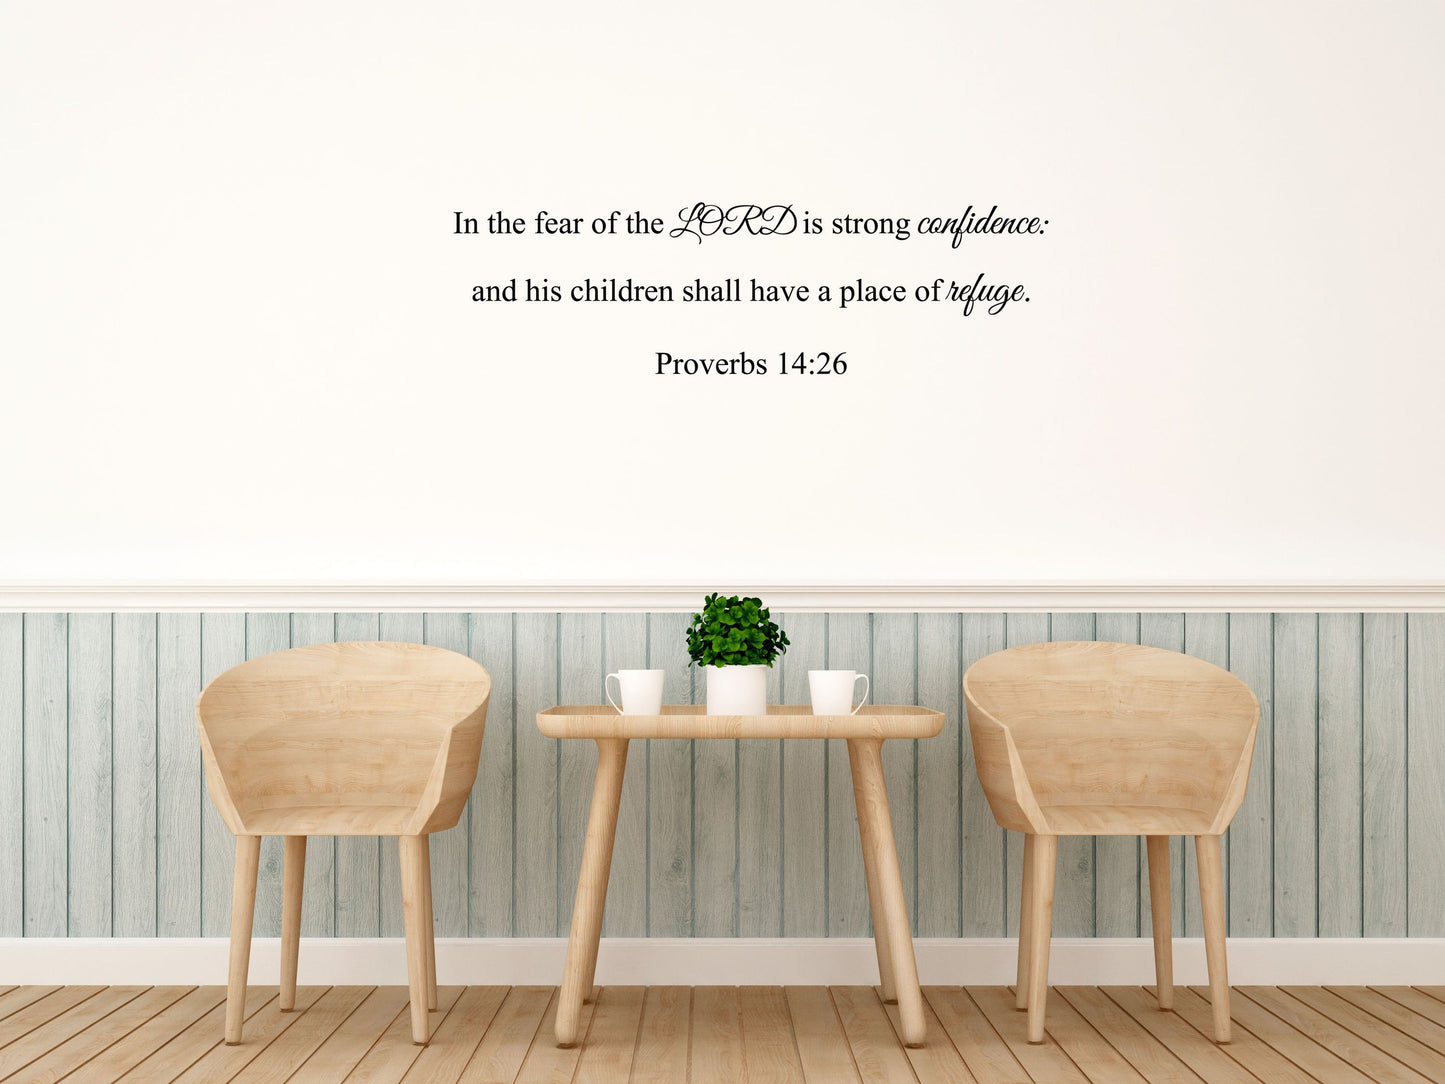 Proverbs 14:26 - KJV Bible Verse Wall Decal, Bible Wall Art, Scripture Wall Decal - Religious Sticker Quotes - Place Of Refuge Decal Vinyl Wall Decal Done 